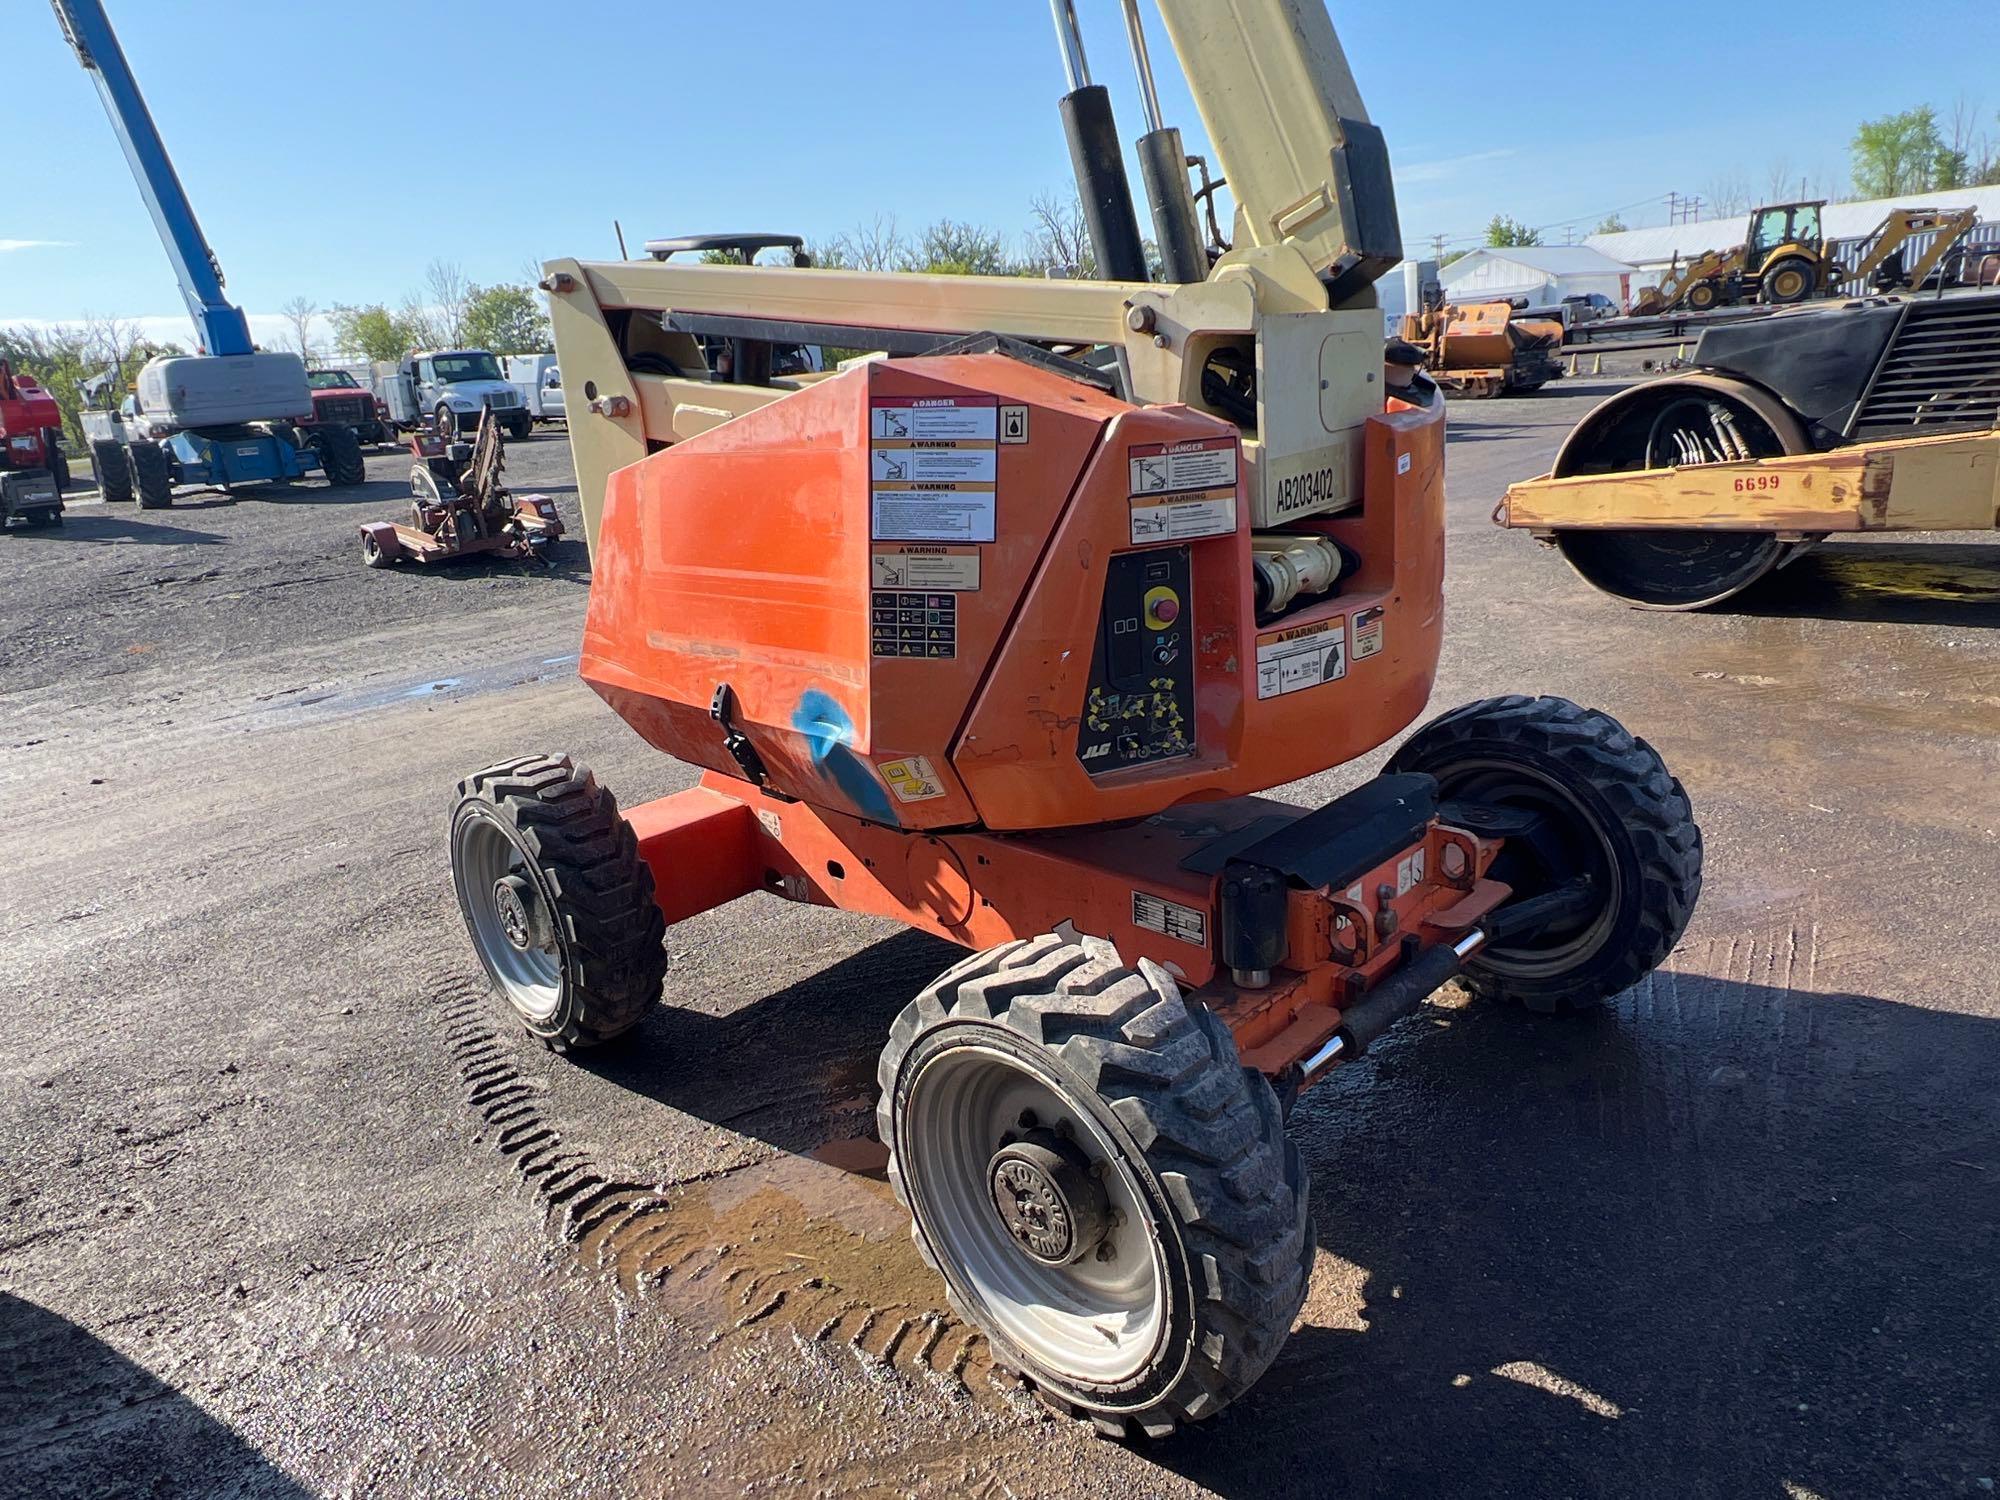 2013 JLG 340AJ BOOM LIFT SN:300178015 4x4, powered by diesel engine, equipped with 34ft. Platform